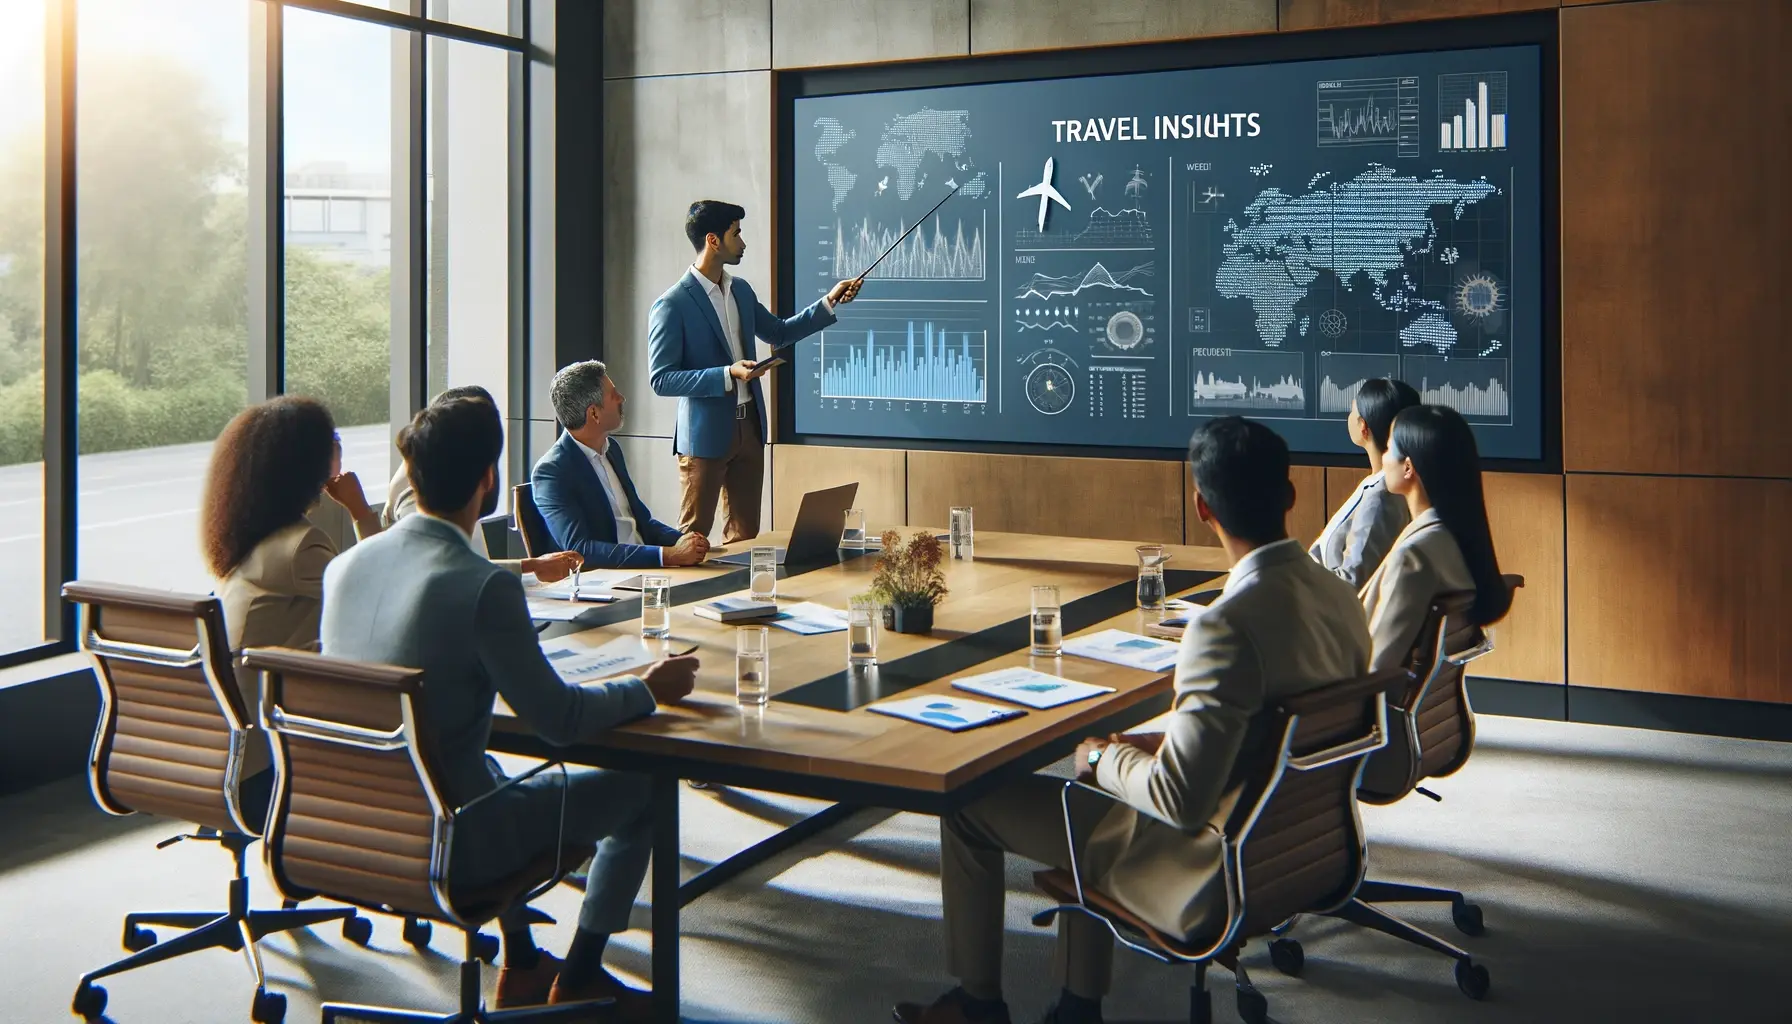 Person presenting travel insights to a group, set in a modern boardroom, with the presenter engaging the audience.